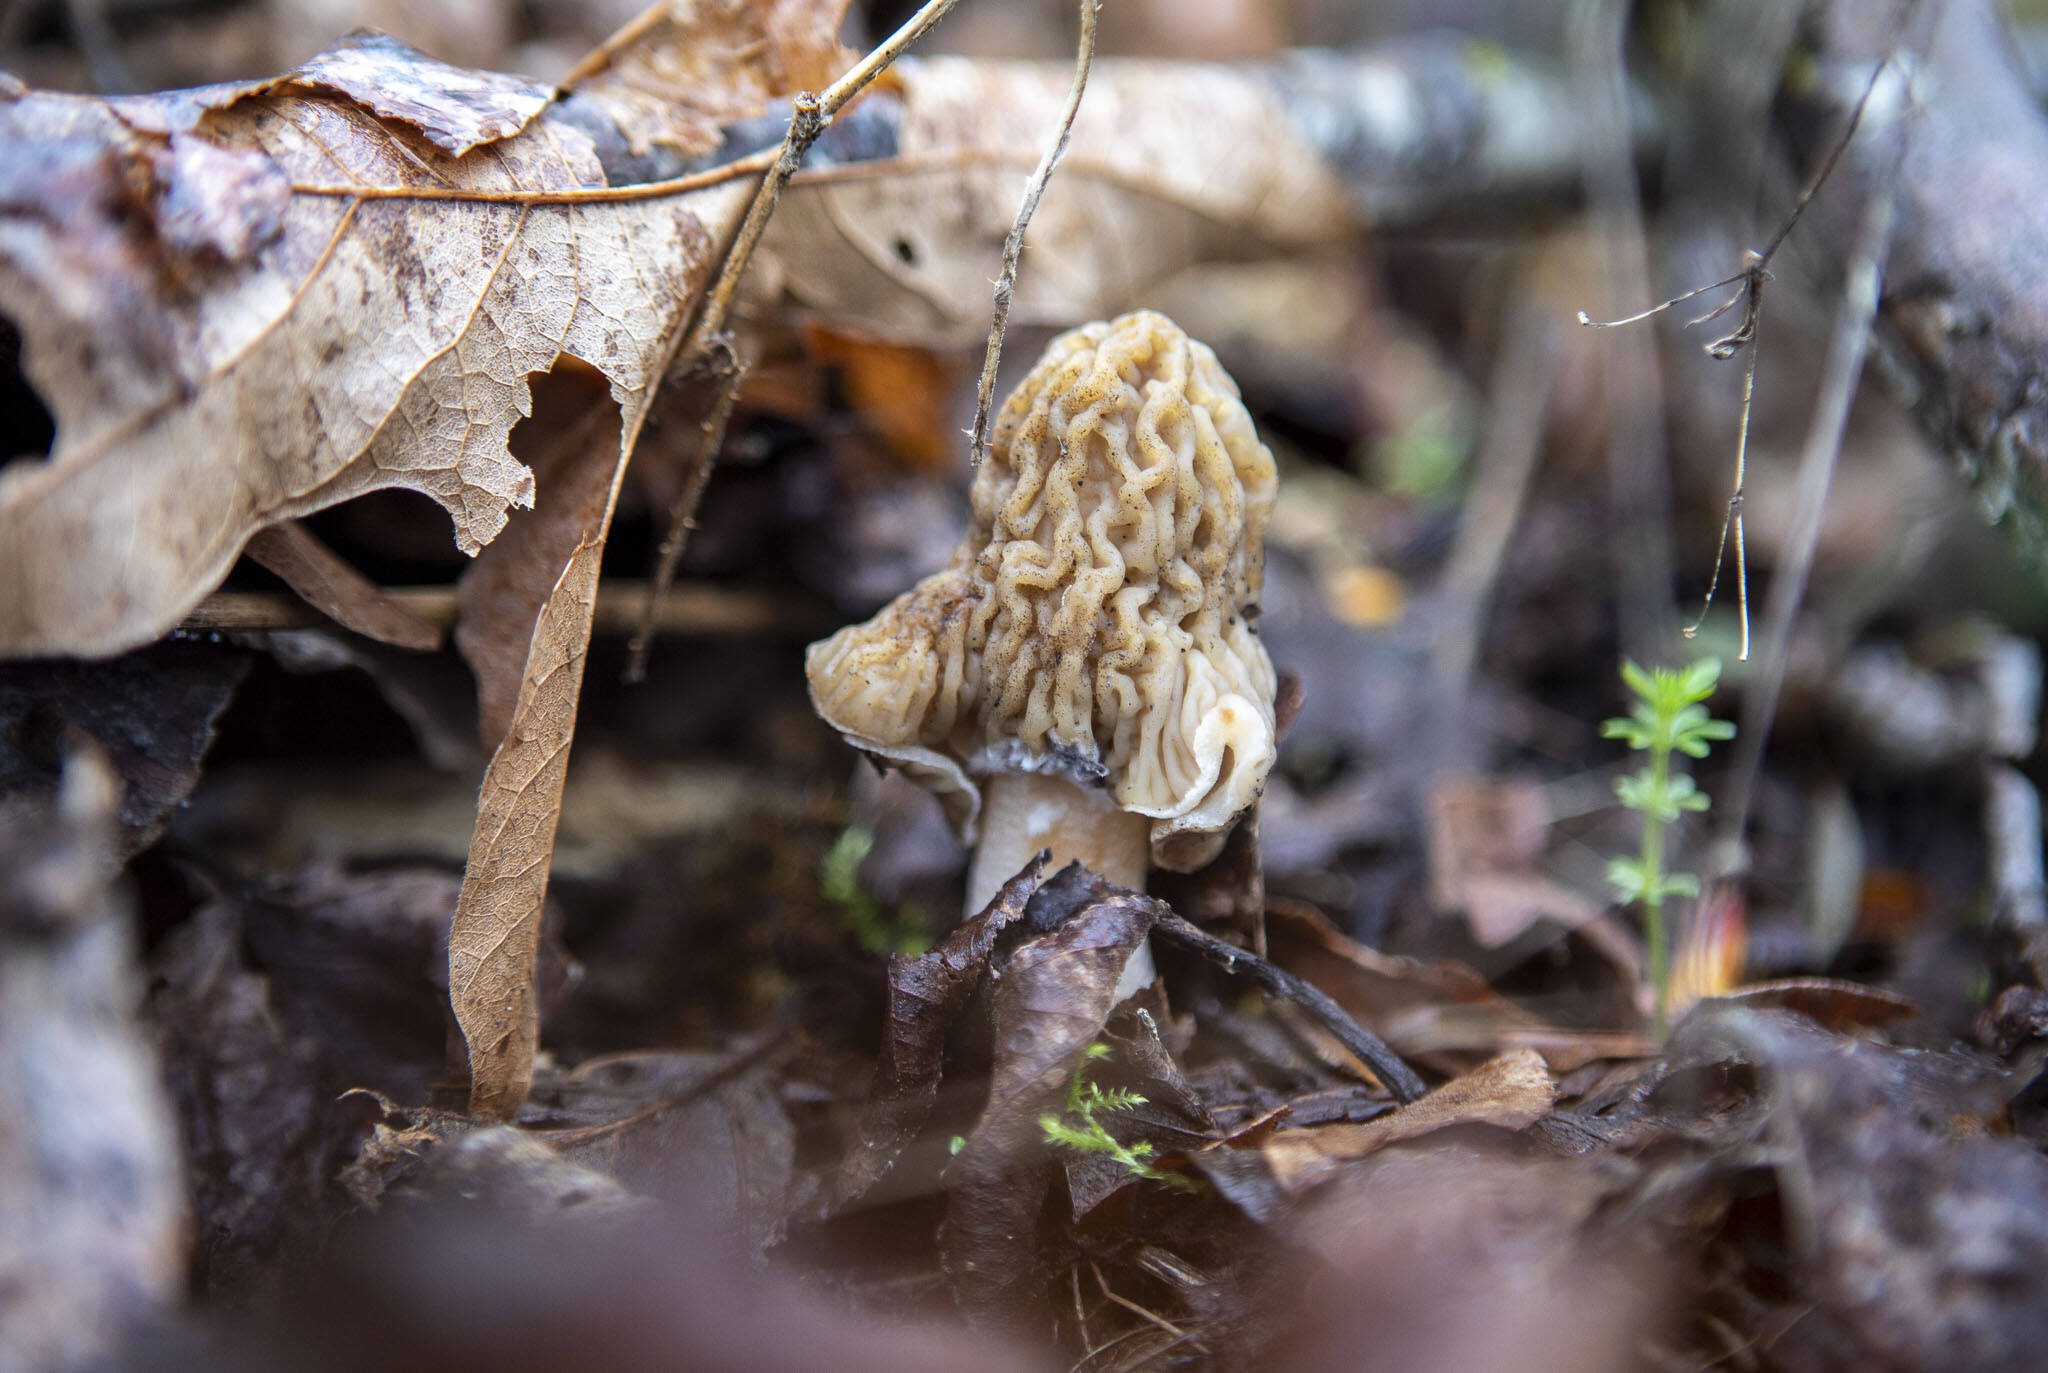 A verpa mushroom at Lord Hill Park on Saturday, April 8, 2023 in Snohomish, Washington. (Annie Barker / The Herald)